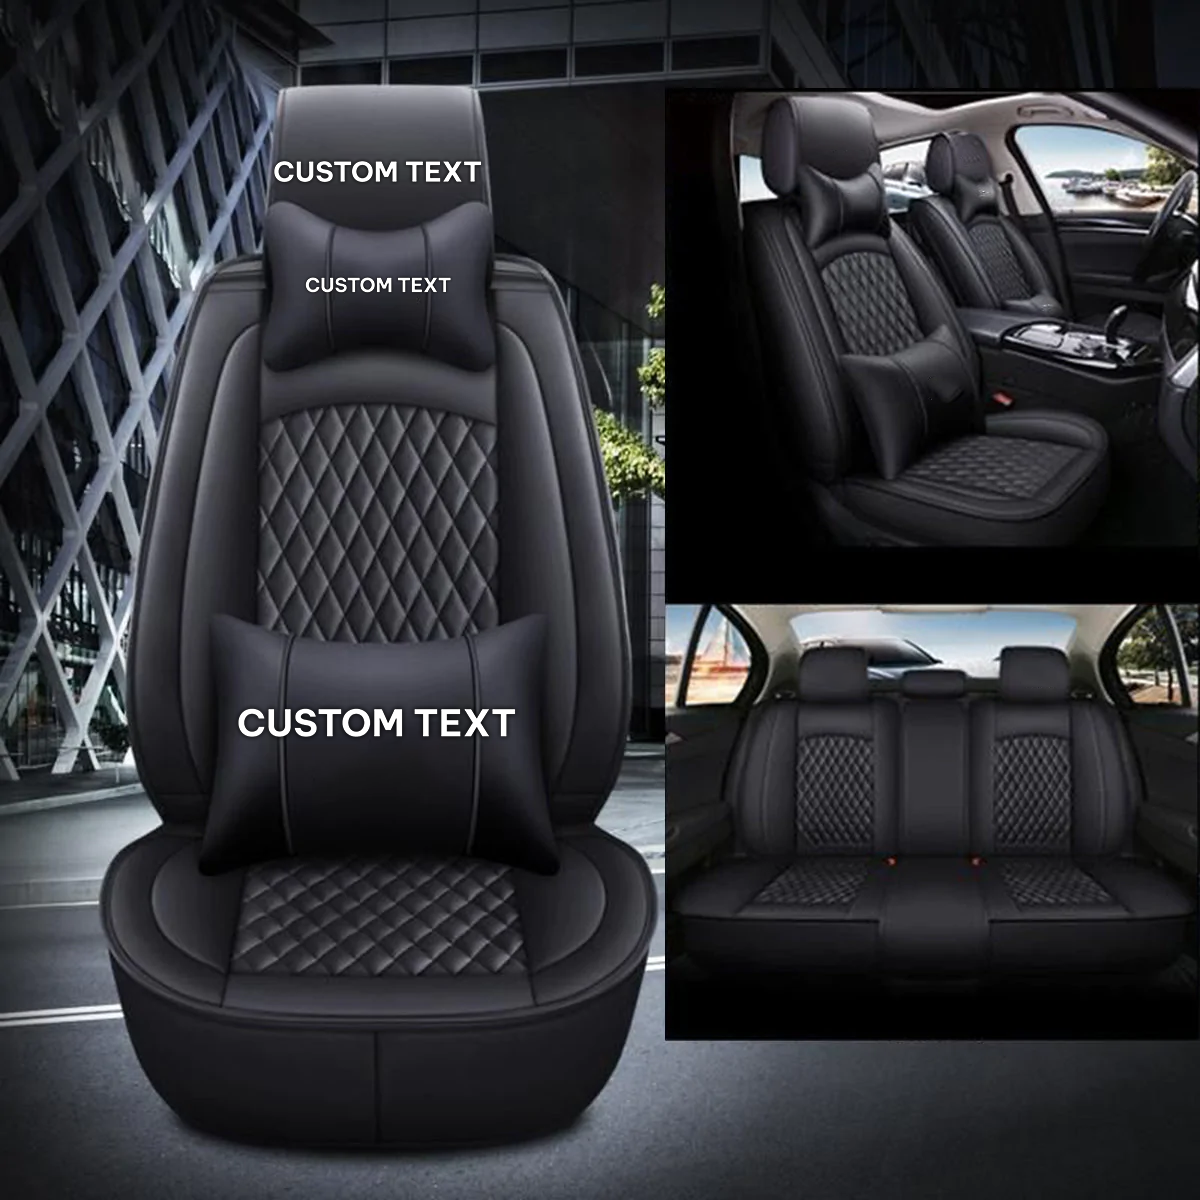 Custom Text For Seat Covers 5 Seats Full Set, Custom Fit For Your Cars, Leatherette Automotive Seat Cushion Protector Universal Fit, Vehicle Auto Interior Decor LI13988